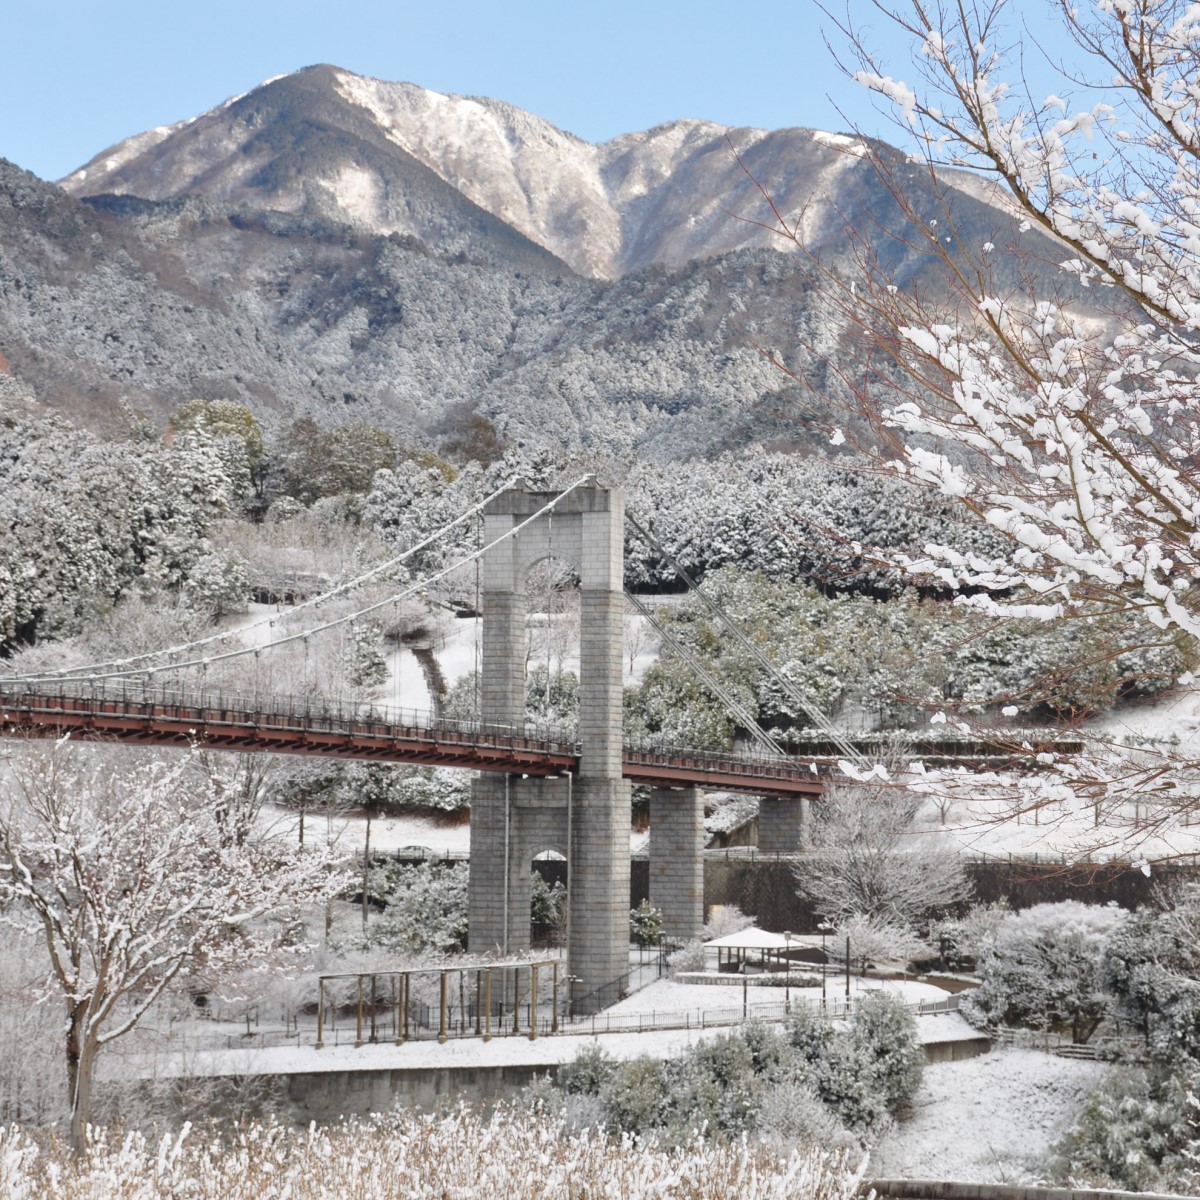 Look at the beautiful scenery in Kanagawa！
From January to February, snow accumulates at high altitude like Hakone and Tanzawa, and even in cities such as Yokohama, there are several days of snowfall. 
#cooljapan #instatravel #travelJapan #instajapan #Kanagawa #trip